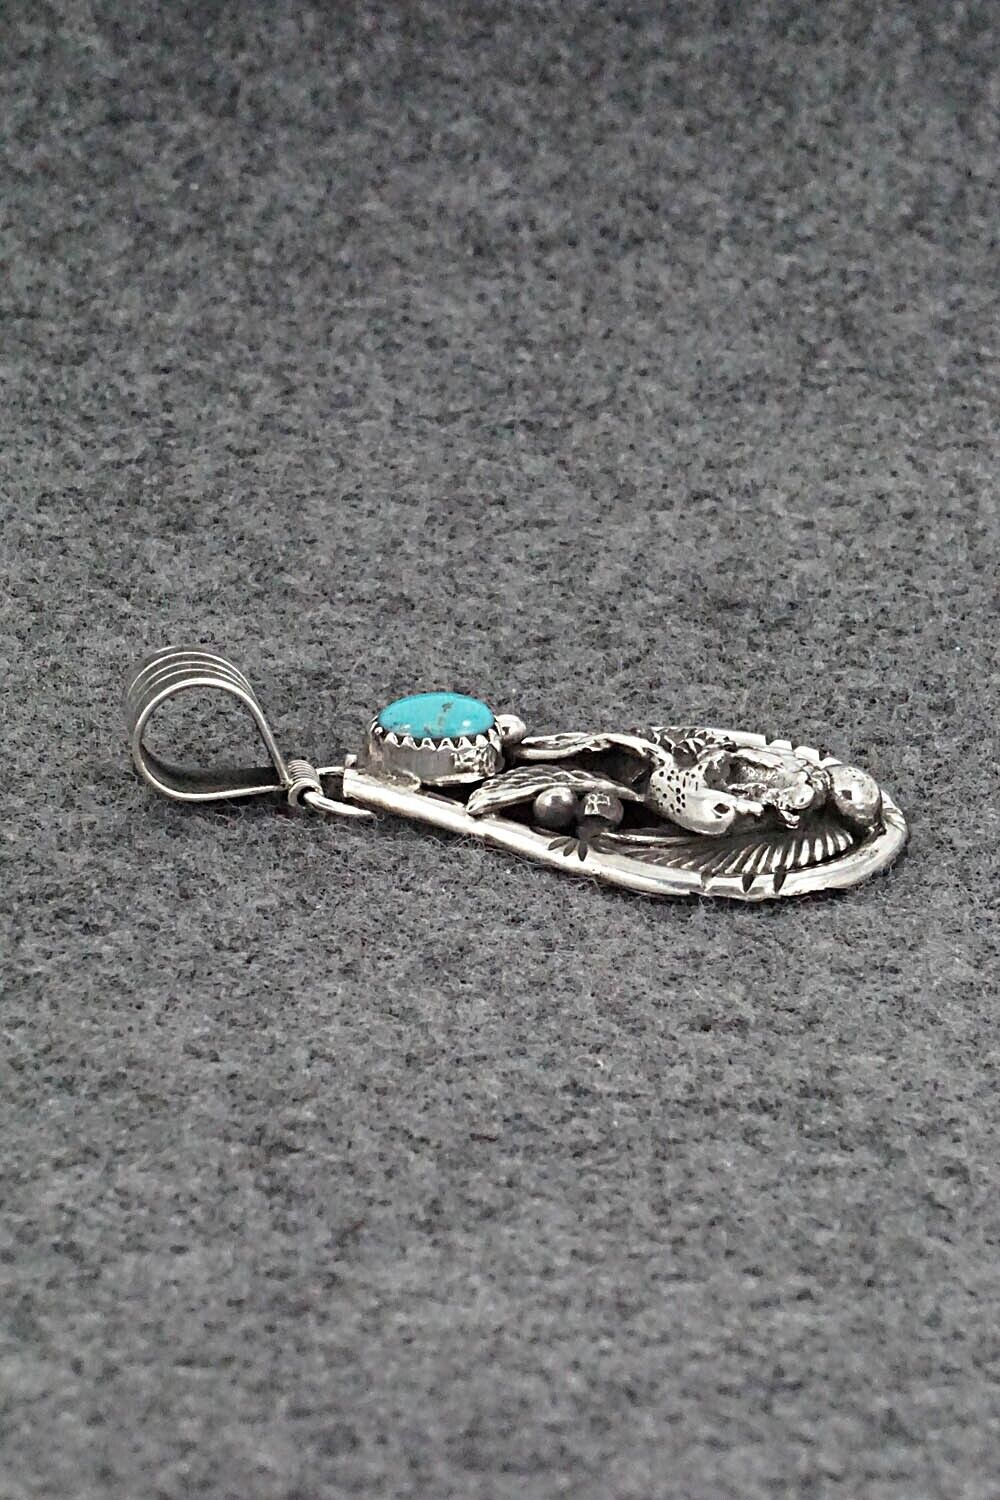 Turquoise & Sterling Silver Pendant - Henry Attakai